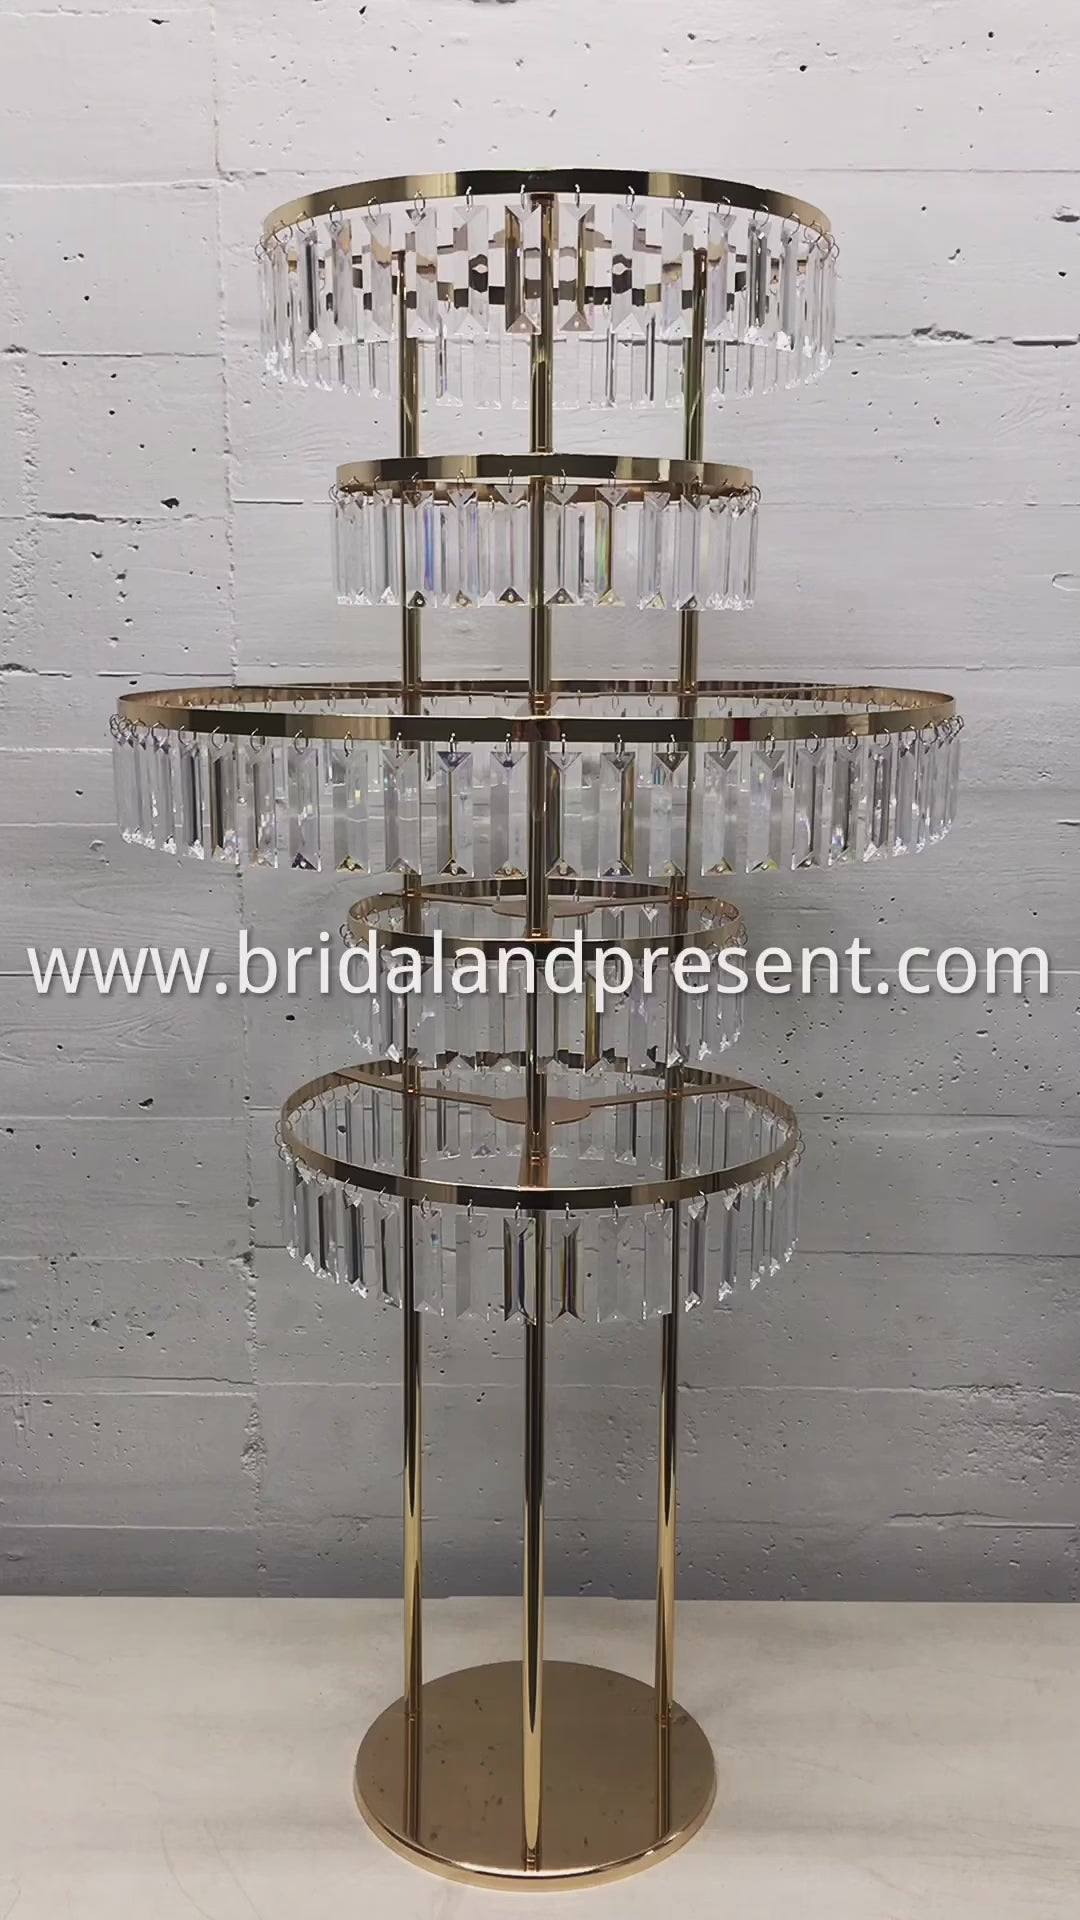 Sturdy flower stand for wedding is perfect for wedding table arrangements. Inspired by wedding centerpiece ideas, DIY wedding centerpieces for round tables by using our tall gold centerpieces, flower column stands and boho wedding centerpieces at bridal shower, wedding reception, rehearsal dinner parties, and events.